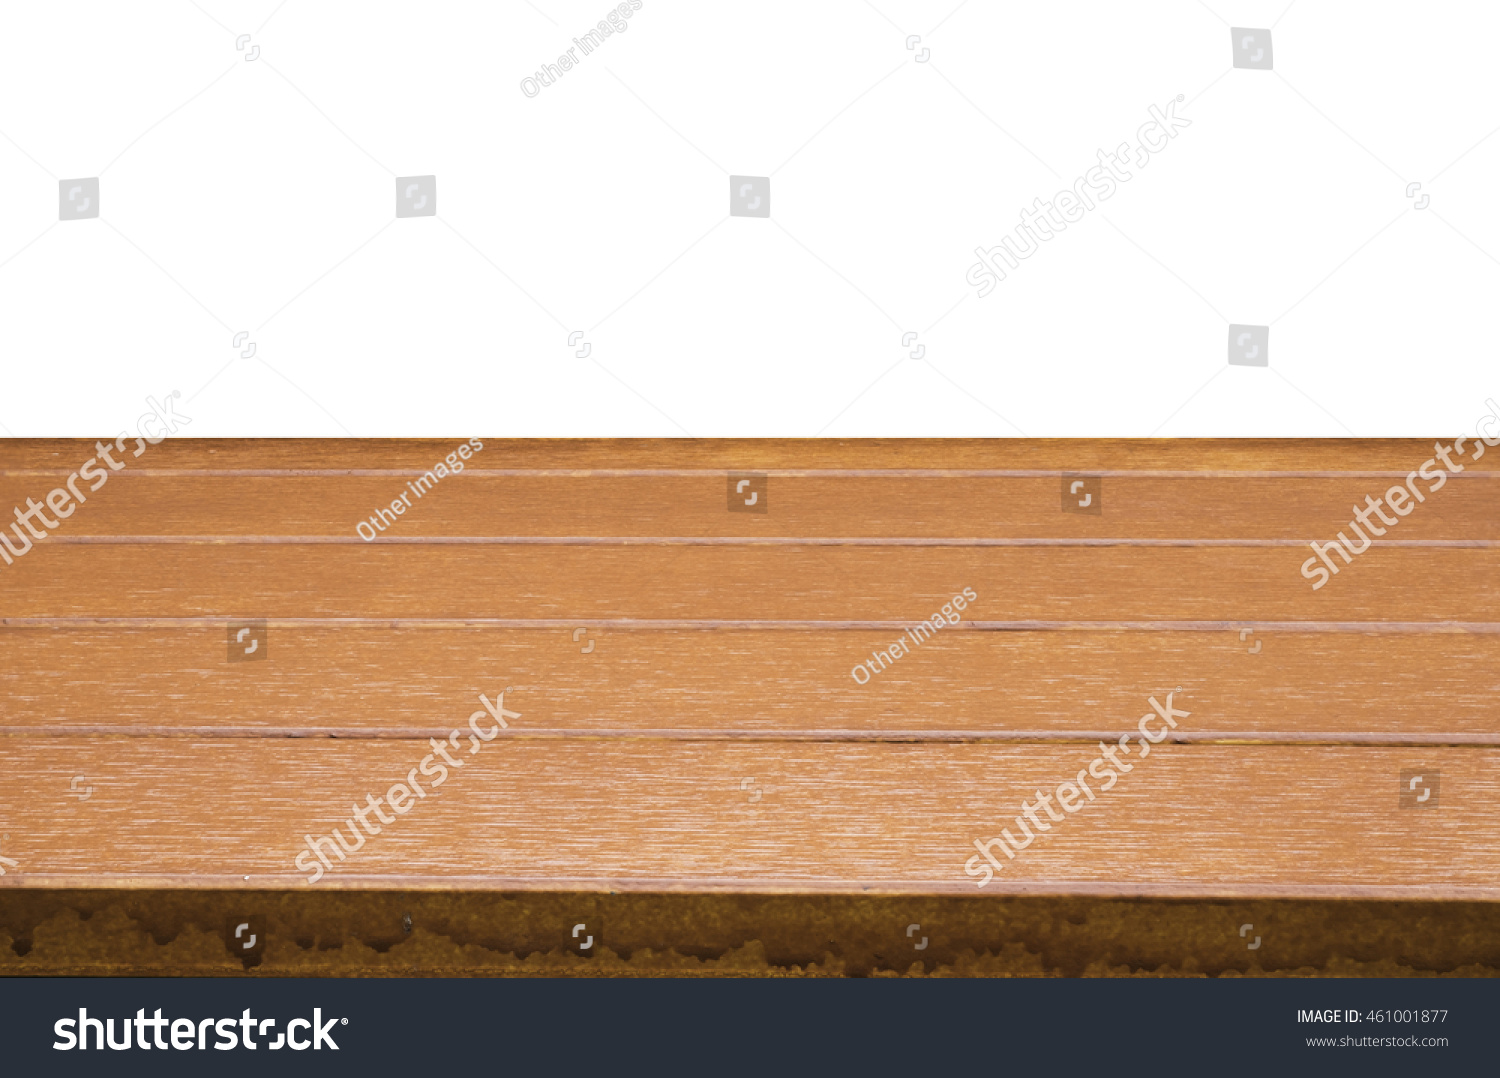 Empty plank wood table top for usage or create montage. #461001877